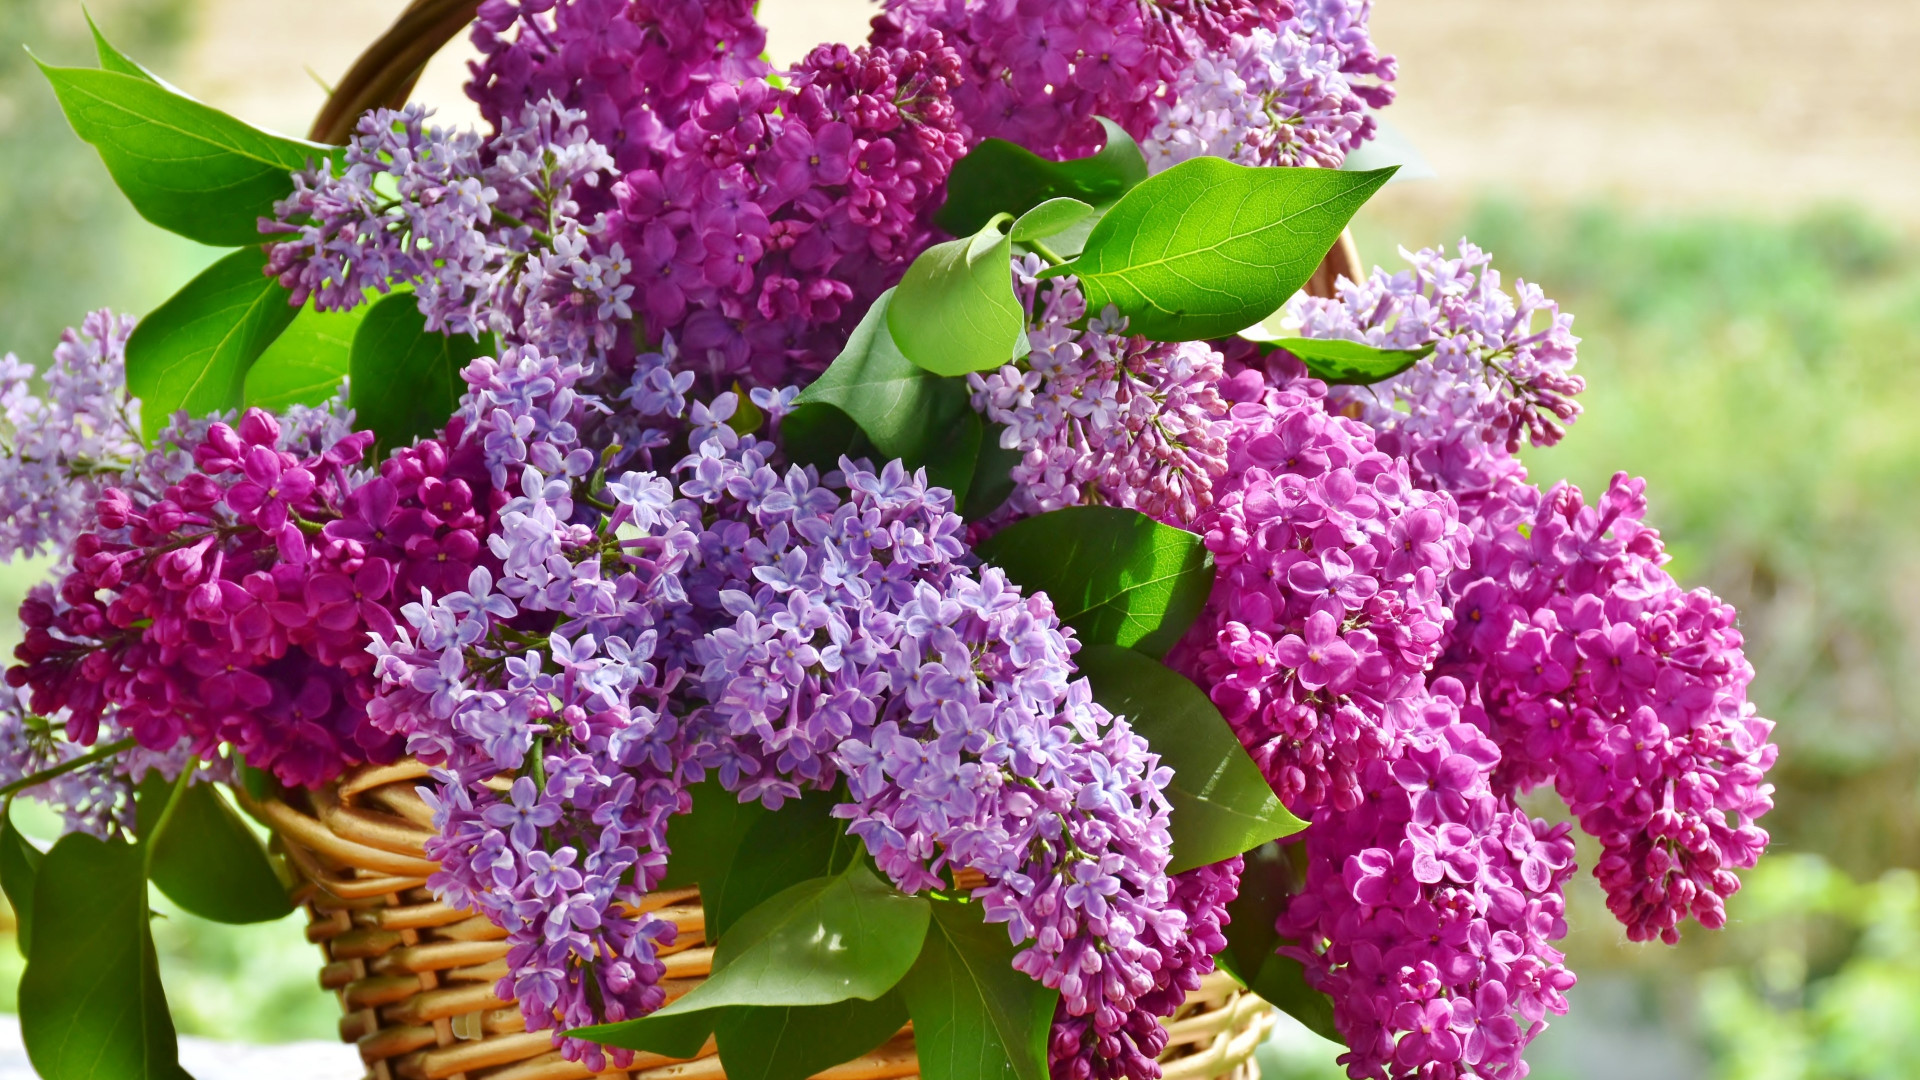 Best basket with lilac flowers wallpaper 1920x1080